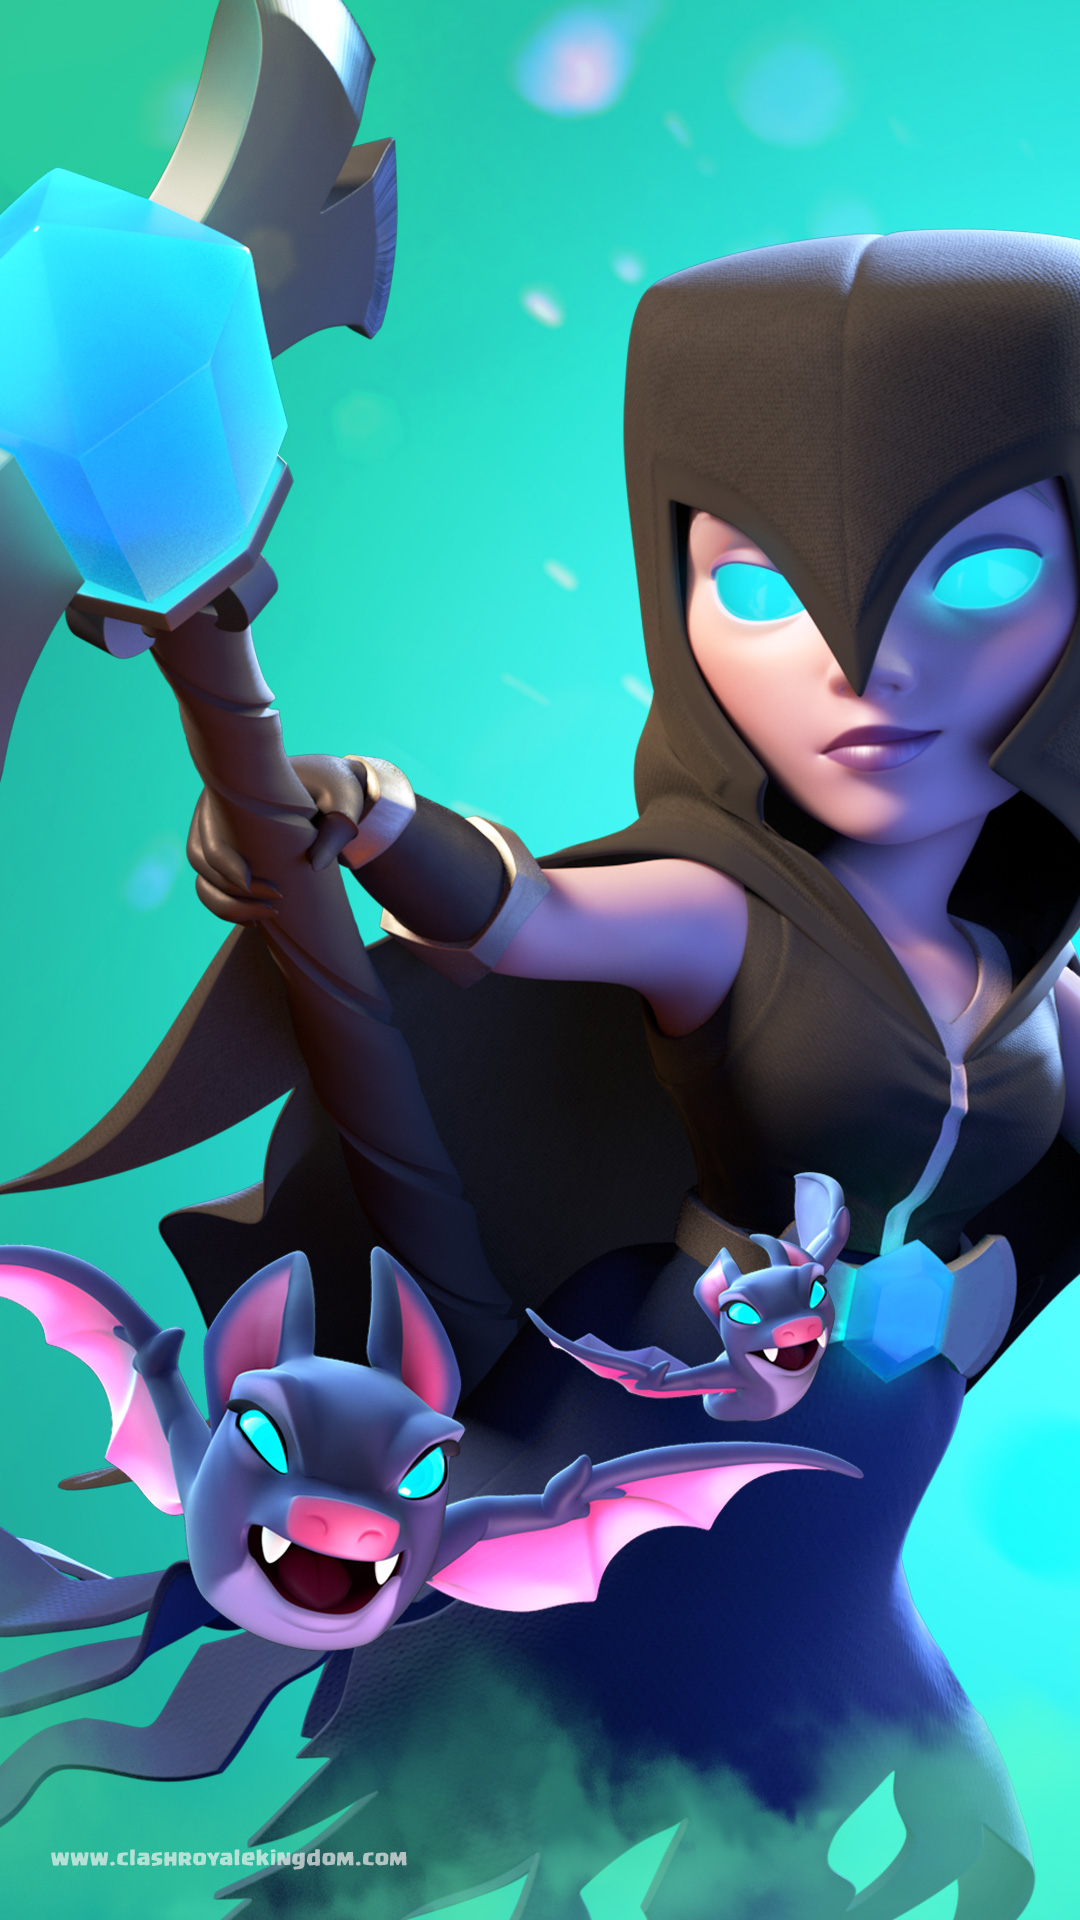 Night Witch Clash Royale Wallpaper Royale Kingdom